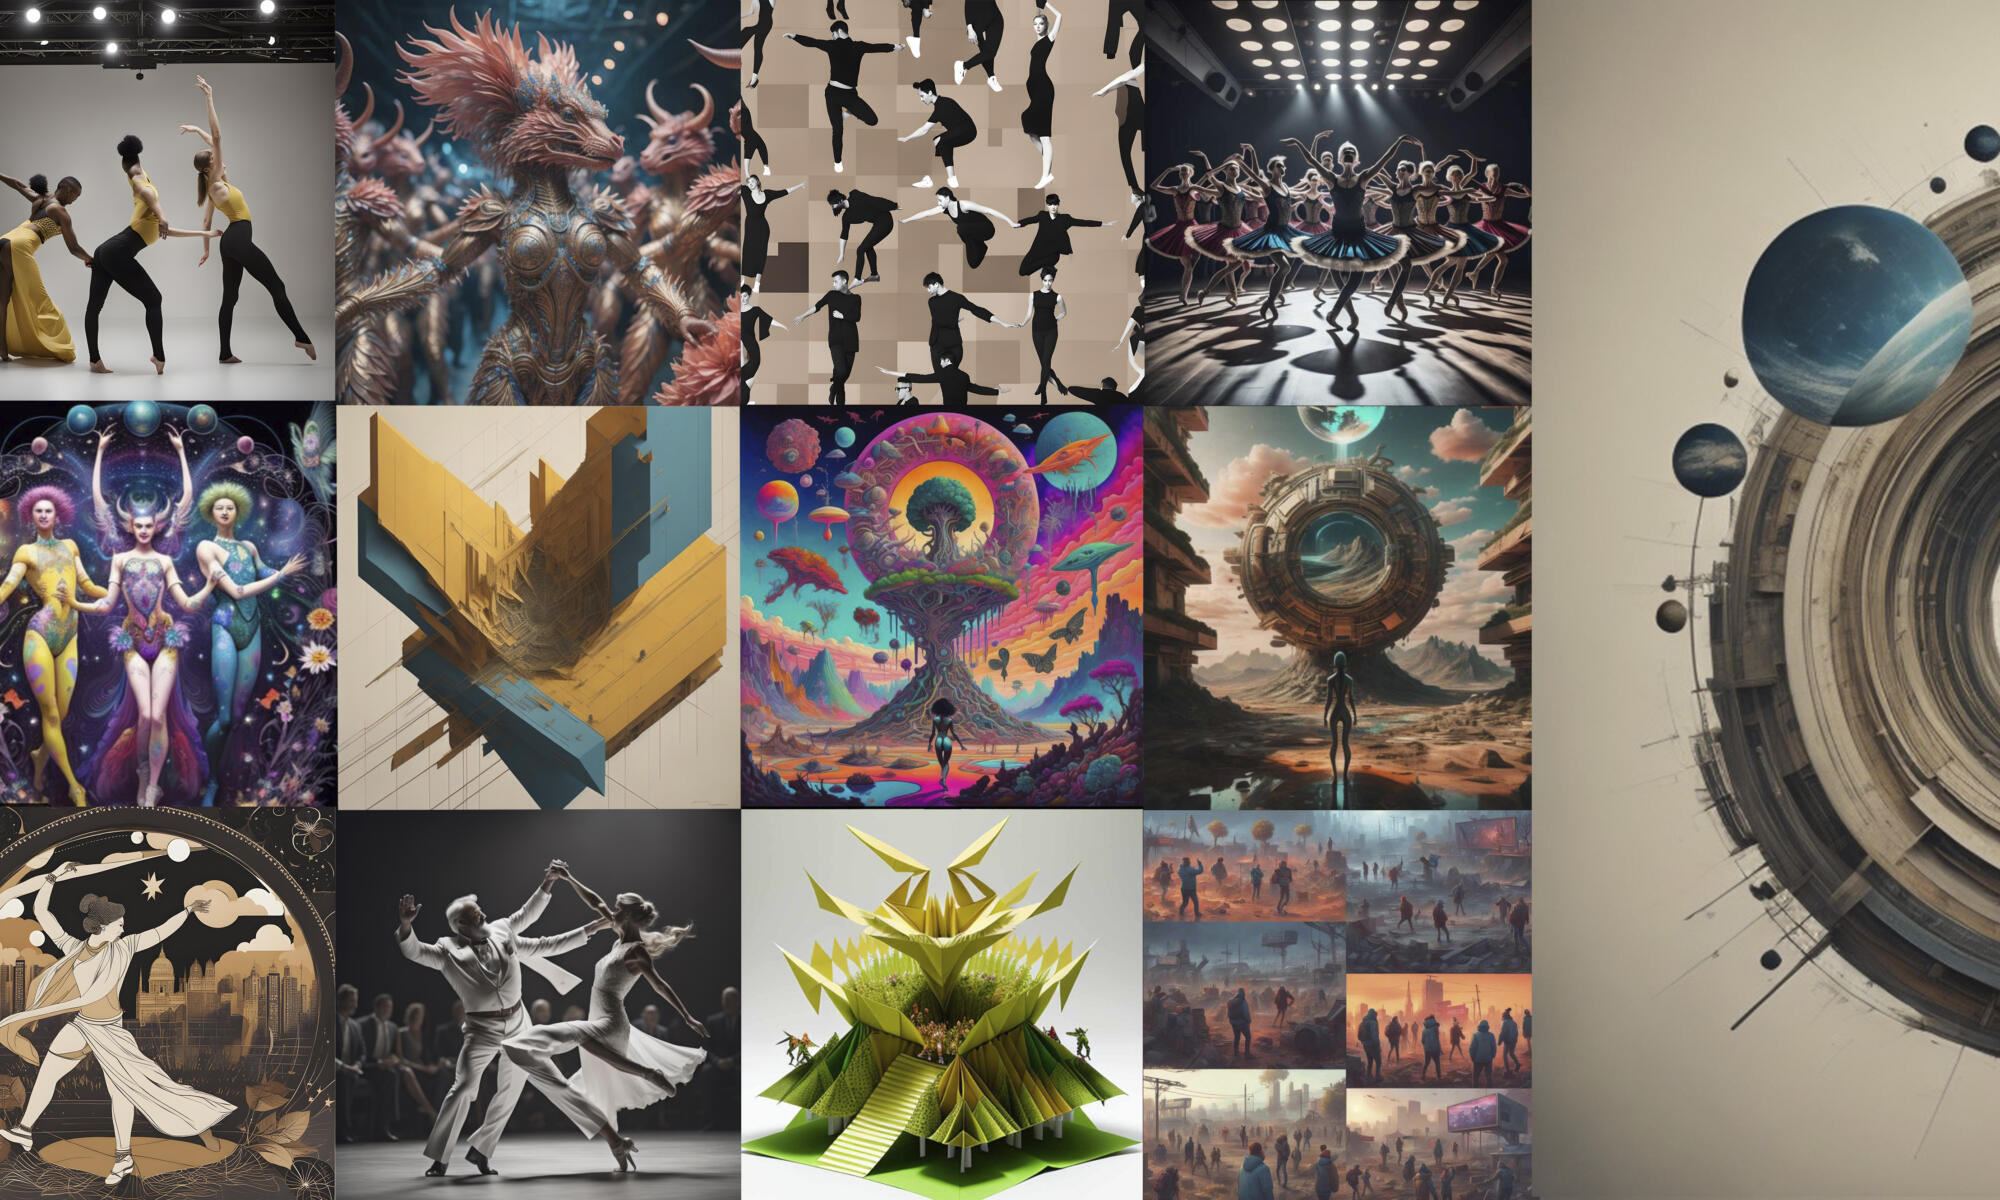 Selection of test images from a hundred visuals generated by an online creative artificial intelligence in response to the event tag words, which have been reassembled and diversified in order to thwart biases.